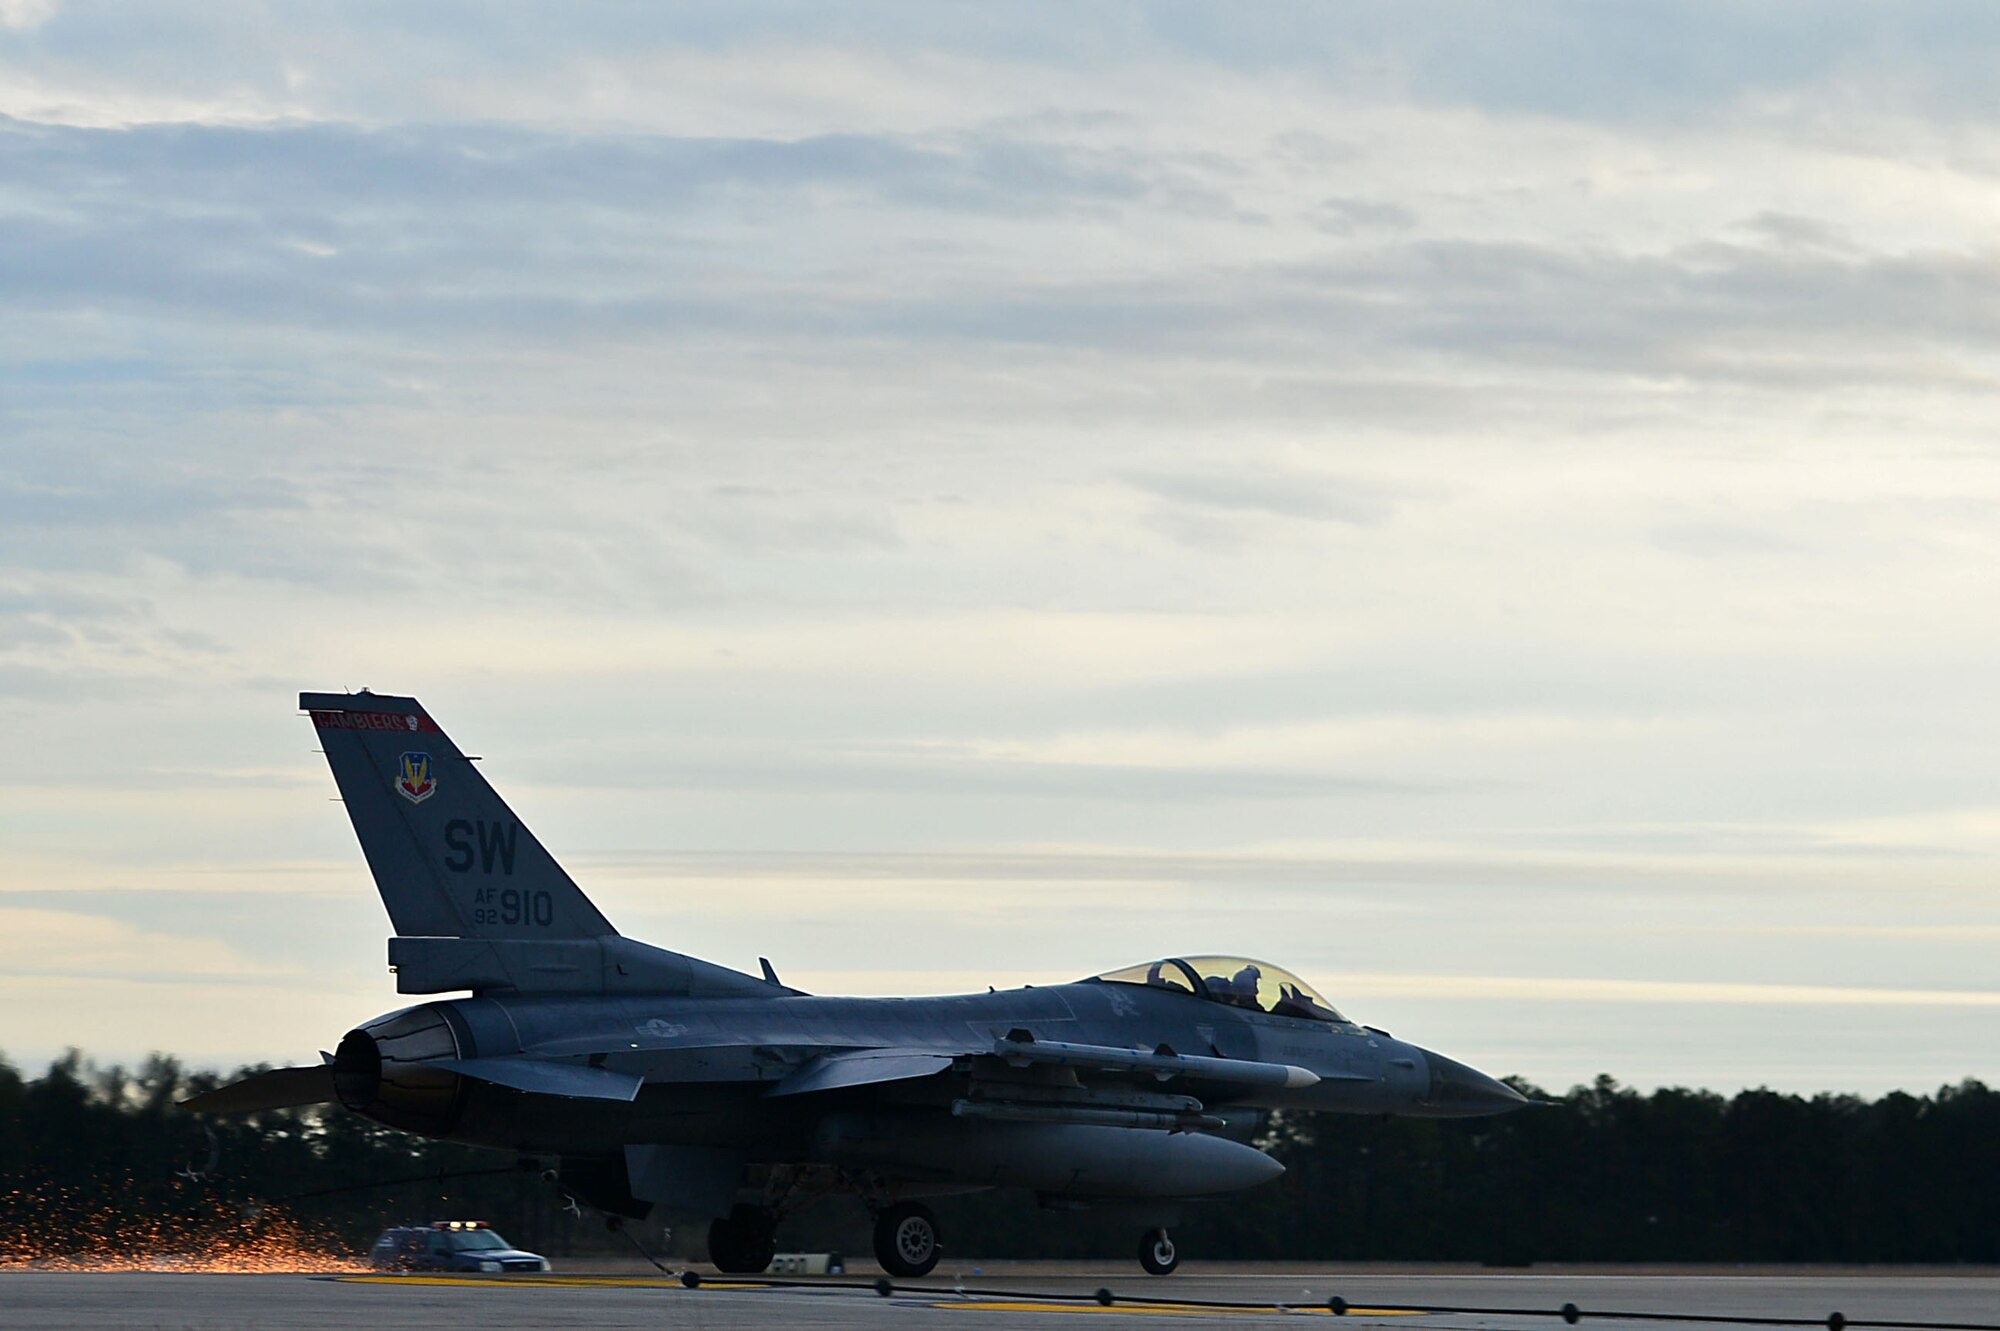 An F-16CM Fighting Falcon assigned to the 77th Fighter Squadron latches onto a Barrier Artillery Kit-12 rotary friction brake aircraft arresting system at Shaw Air Force Base, S.C., Dec. 3, 2016. The arresting systems are tested annually to ensure proper functionality when halting an aircraft in distress. (U.S. Air Force photo by Airman 1st Class Christopher Maldonado)